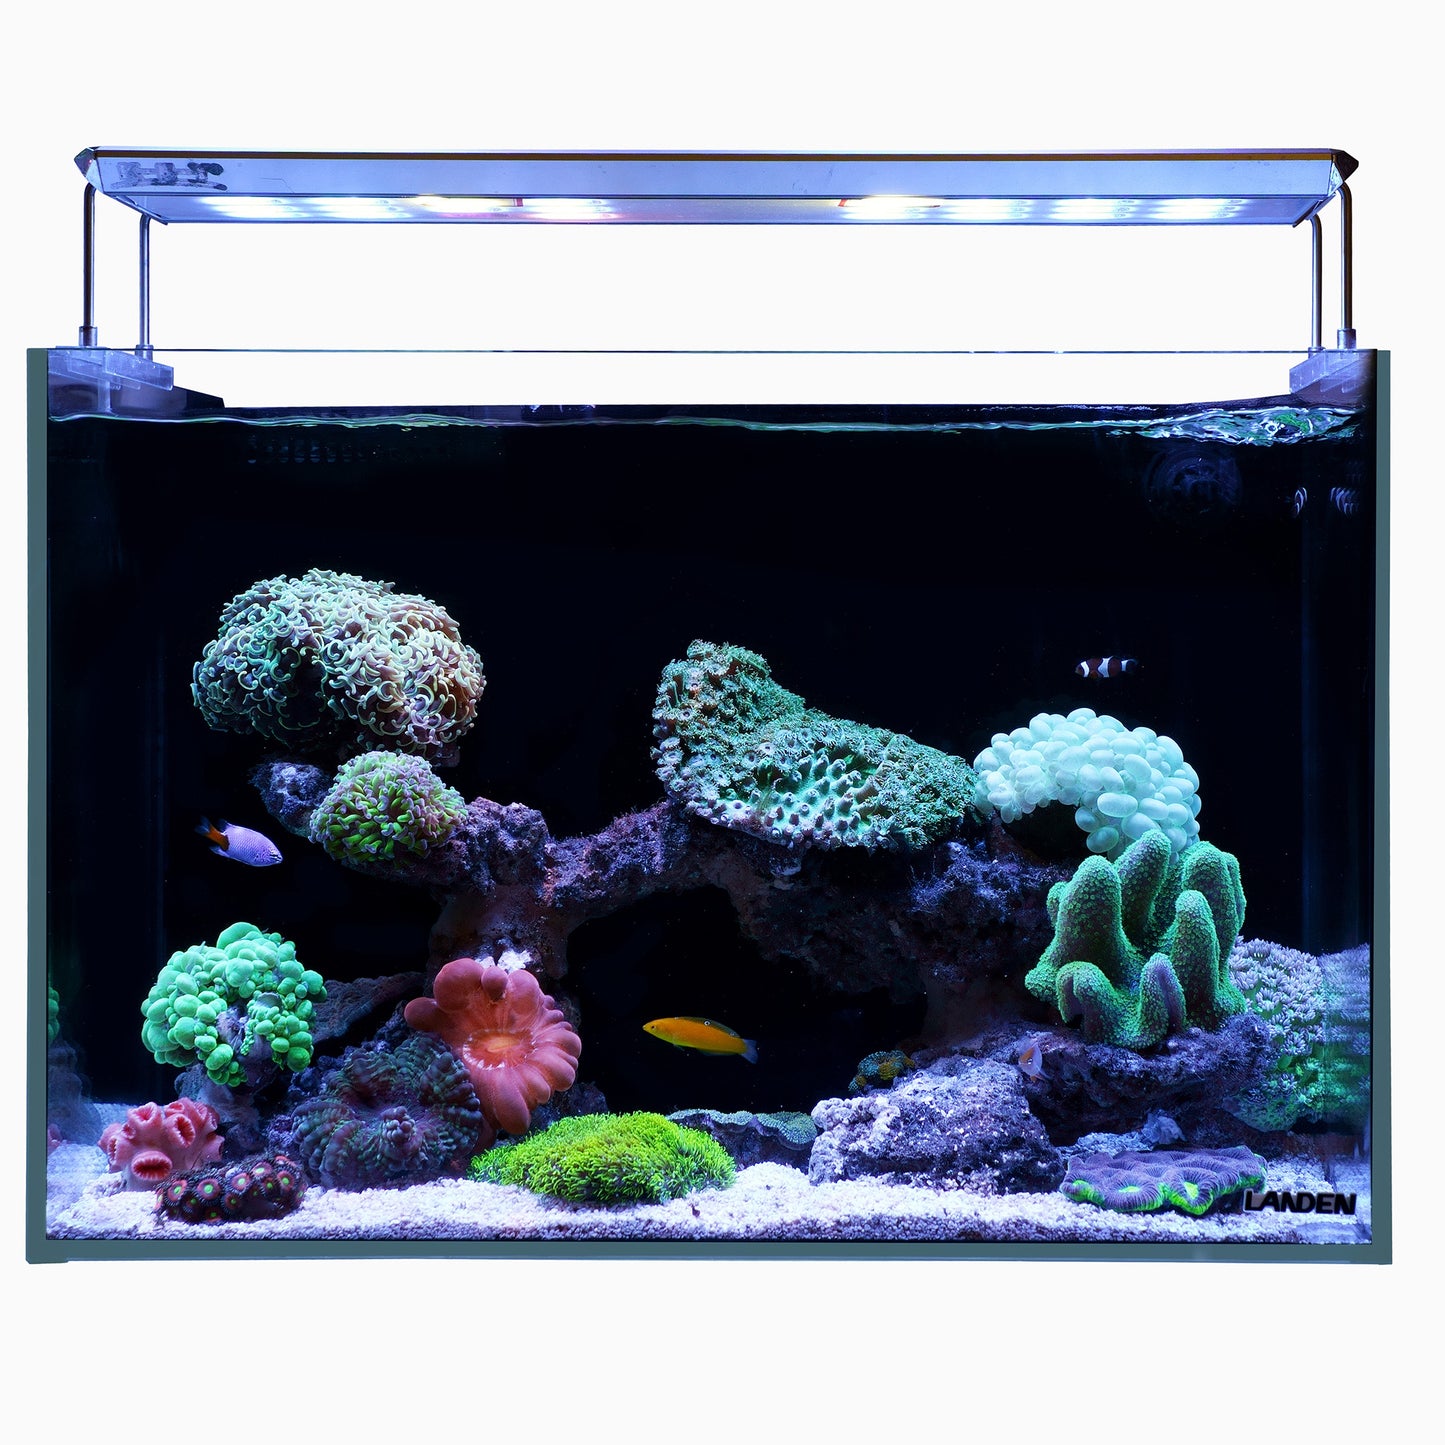 Landen 60P 26.23 Gallon Ultra Clear All Glass Rimless Low Iron Aquarium Tank with Rear Filtration Chamber for Salt and Fresh (Return Pump Included) 23.6Wx17.7Dx15.8H in(60x45x40cm)